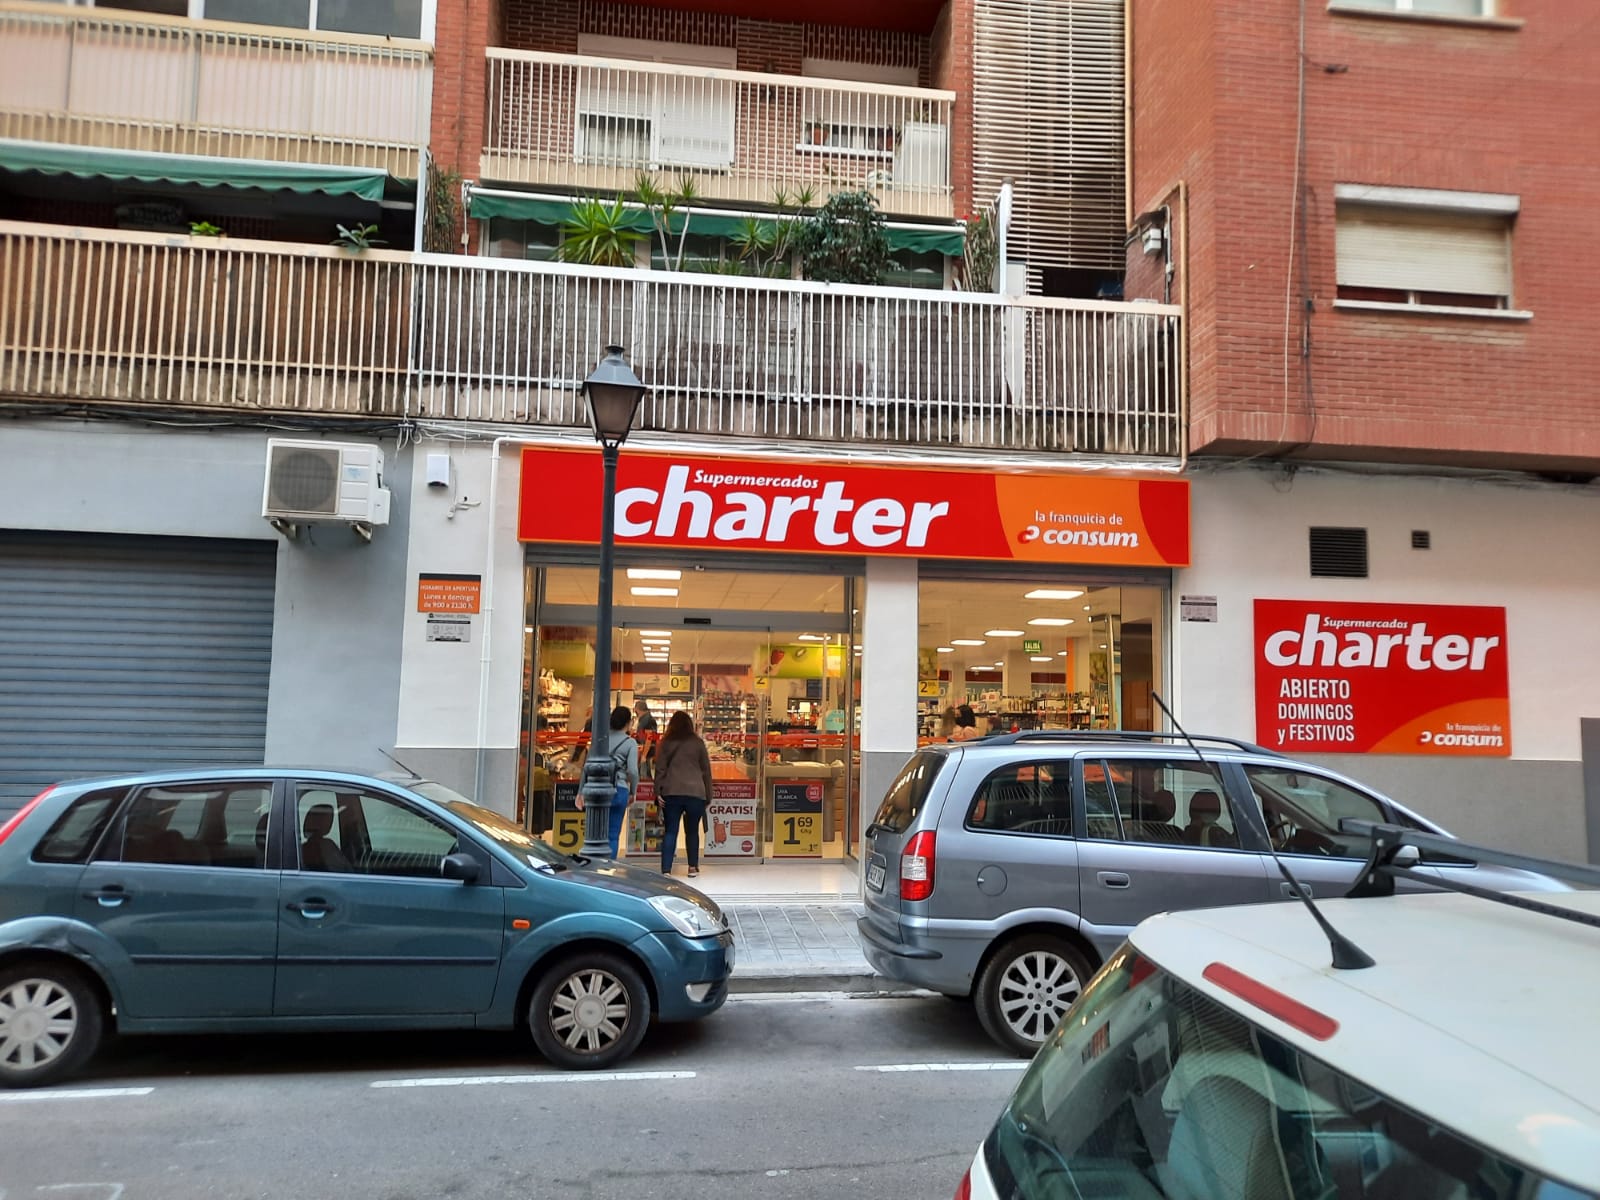 Charter inaugurates a new supermarket in Valencia with which it reaches